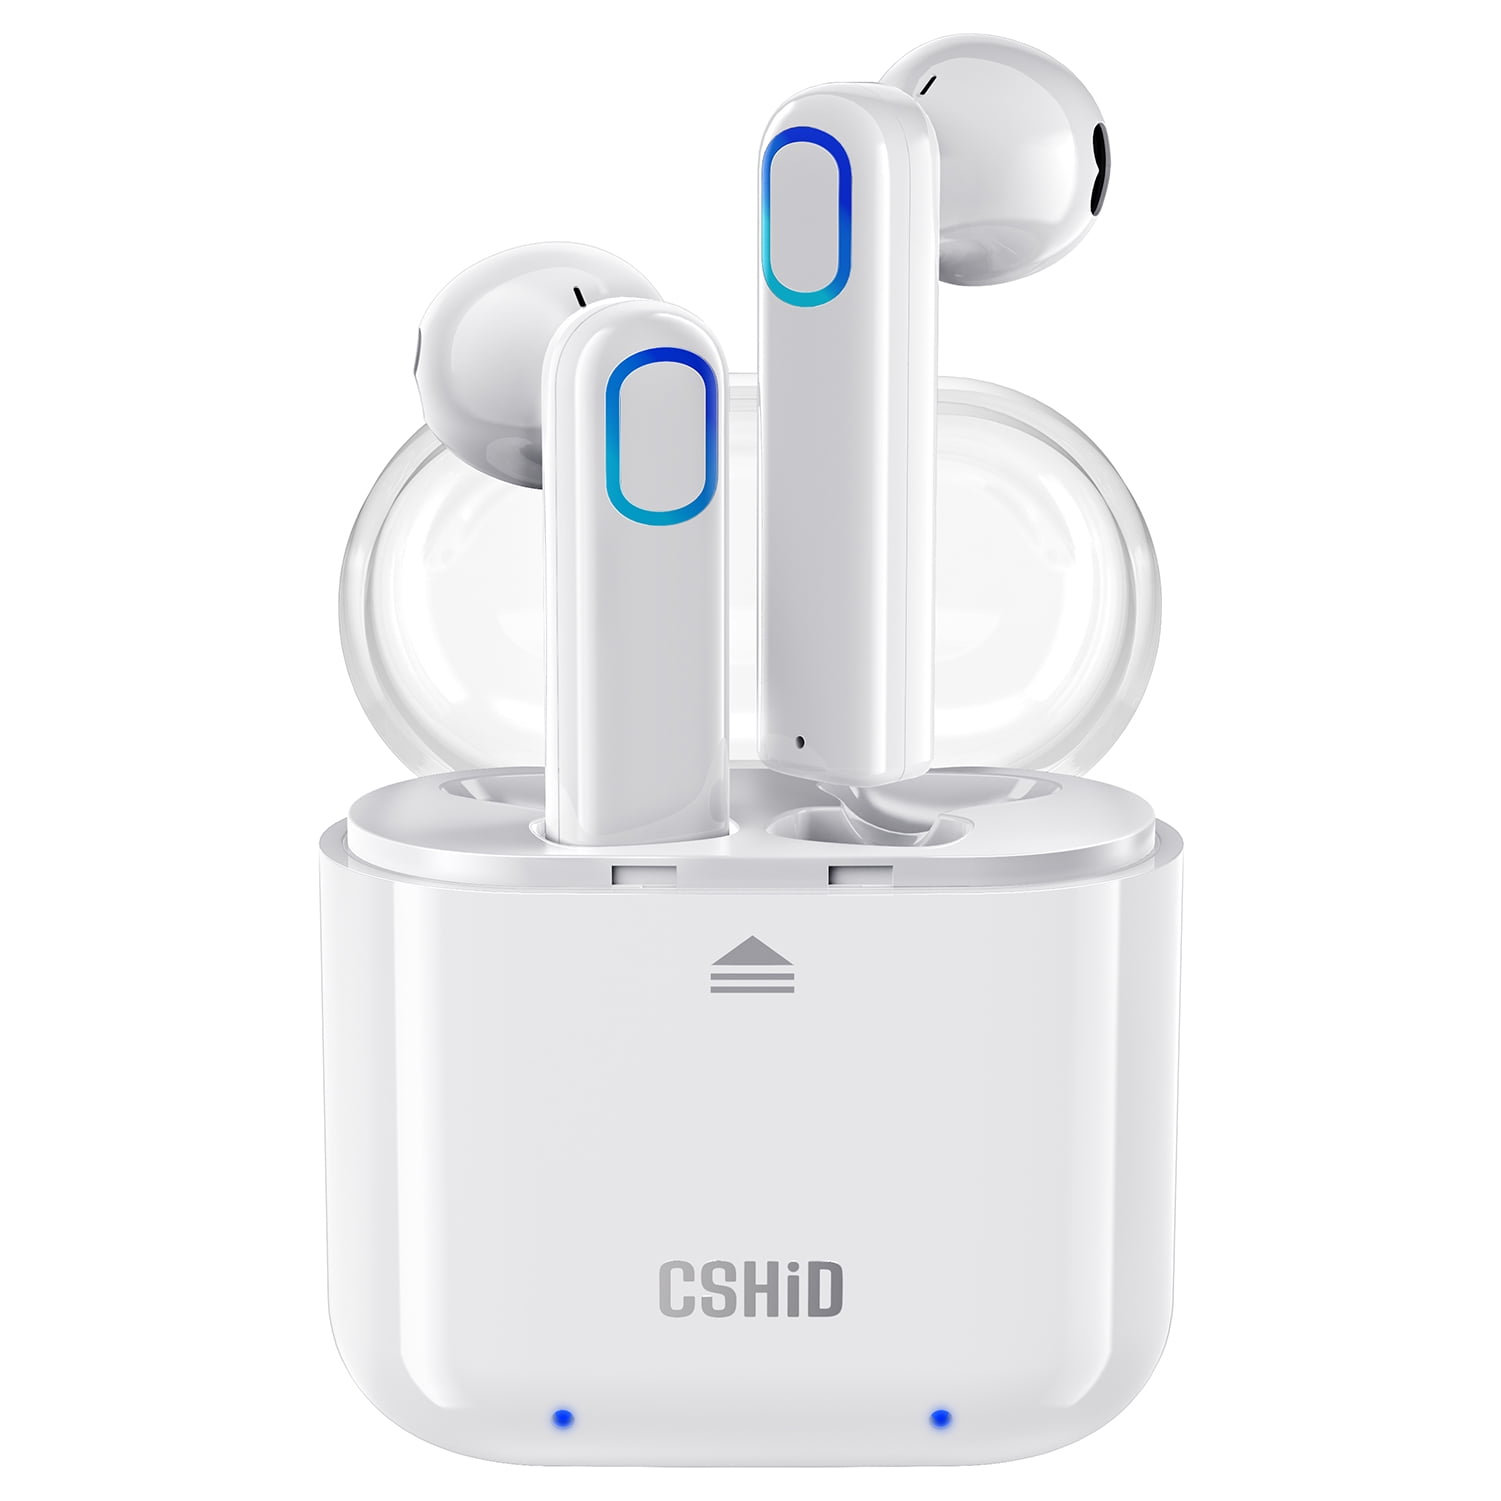 Wireless Headphones Bluetooth 5.0 Stereo Earphones Mini In-ear Earbuds Earphones with Built-in Mic Portable Charging Case Compatible with Huawei LG Mi Nokia Samsung Galaxy iPhone 